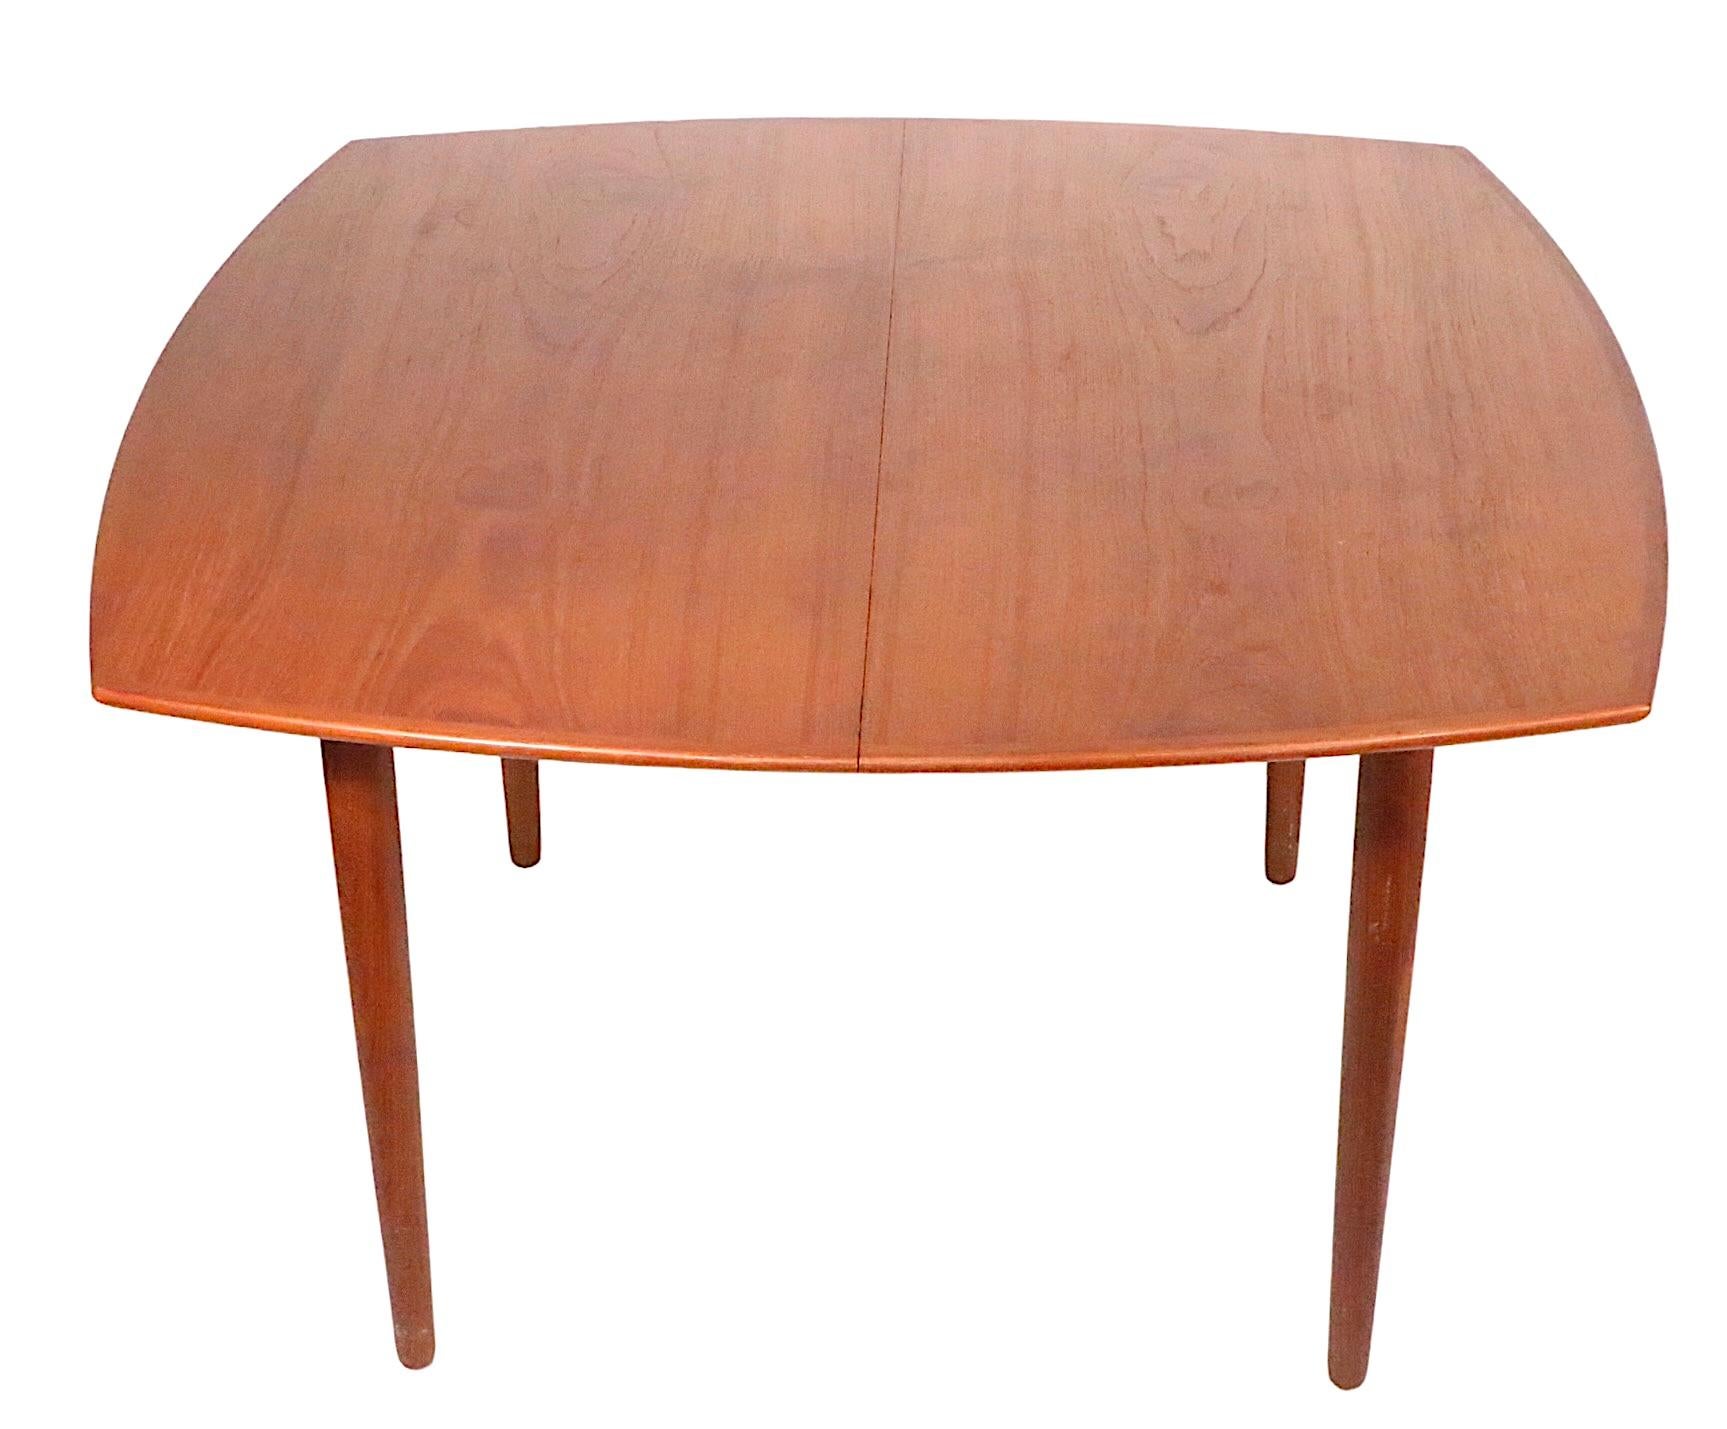 Danish Mid Century Modern Teak Extension  Dining Table by H W Klein  c 1950's For Sale 13